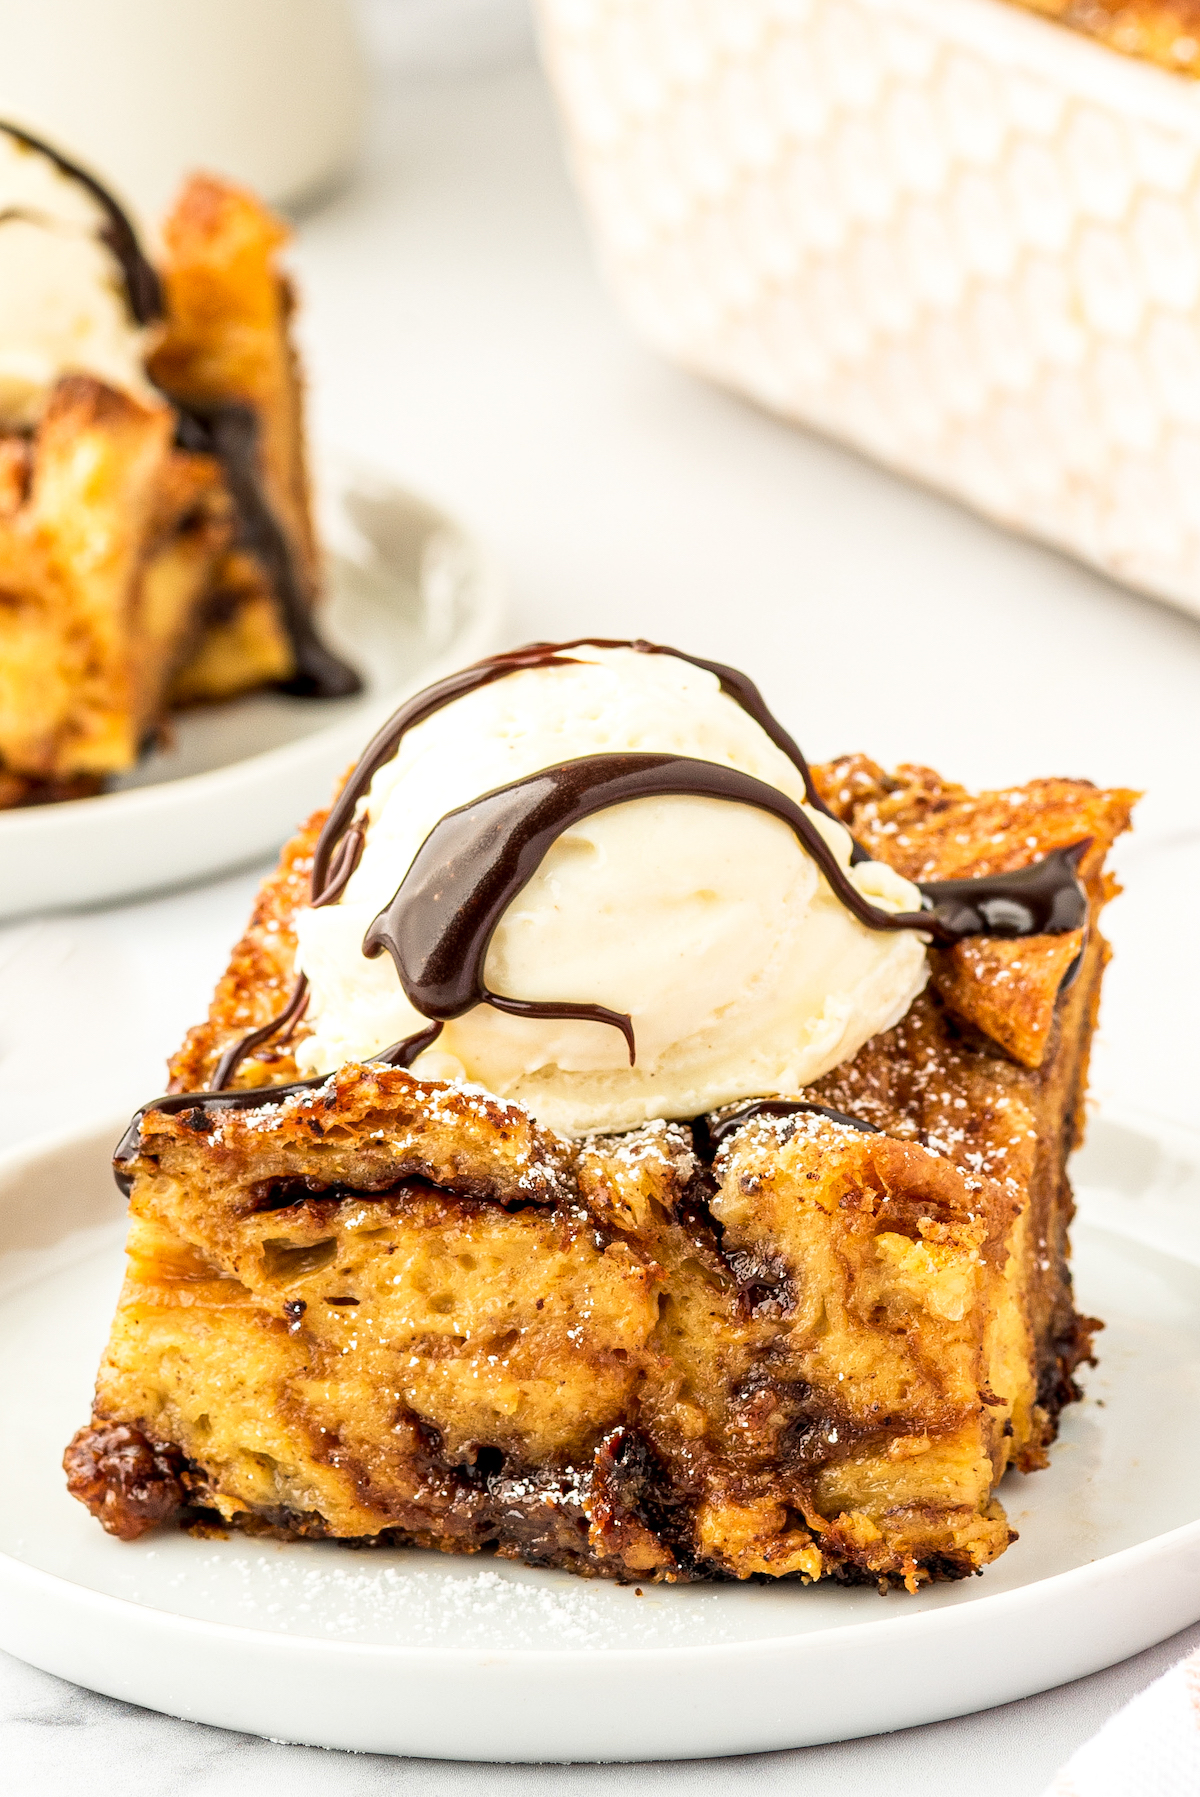 A slice of croissant bread pudding with nutella on a white plate with ice cream and chocolate sauce on top.